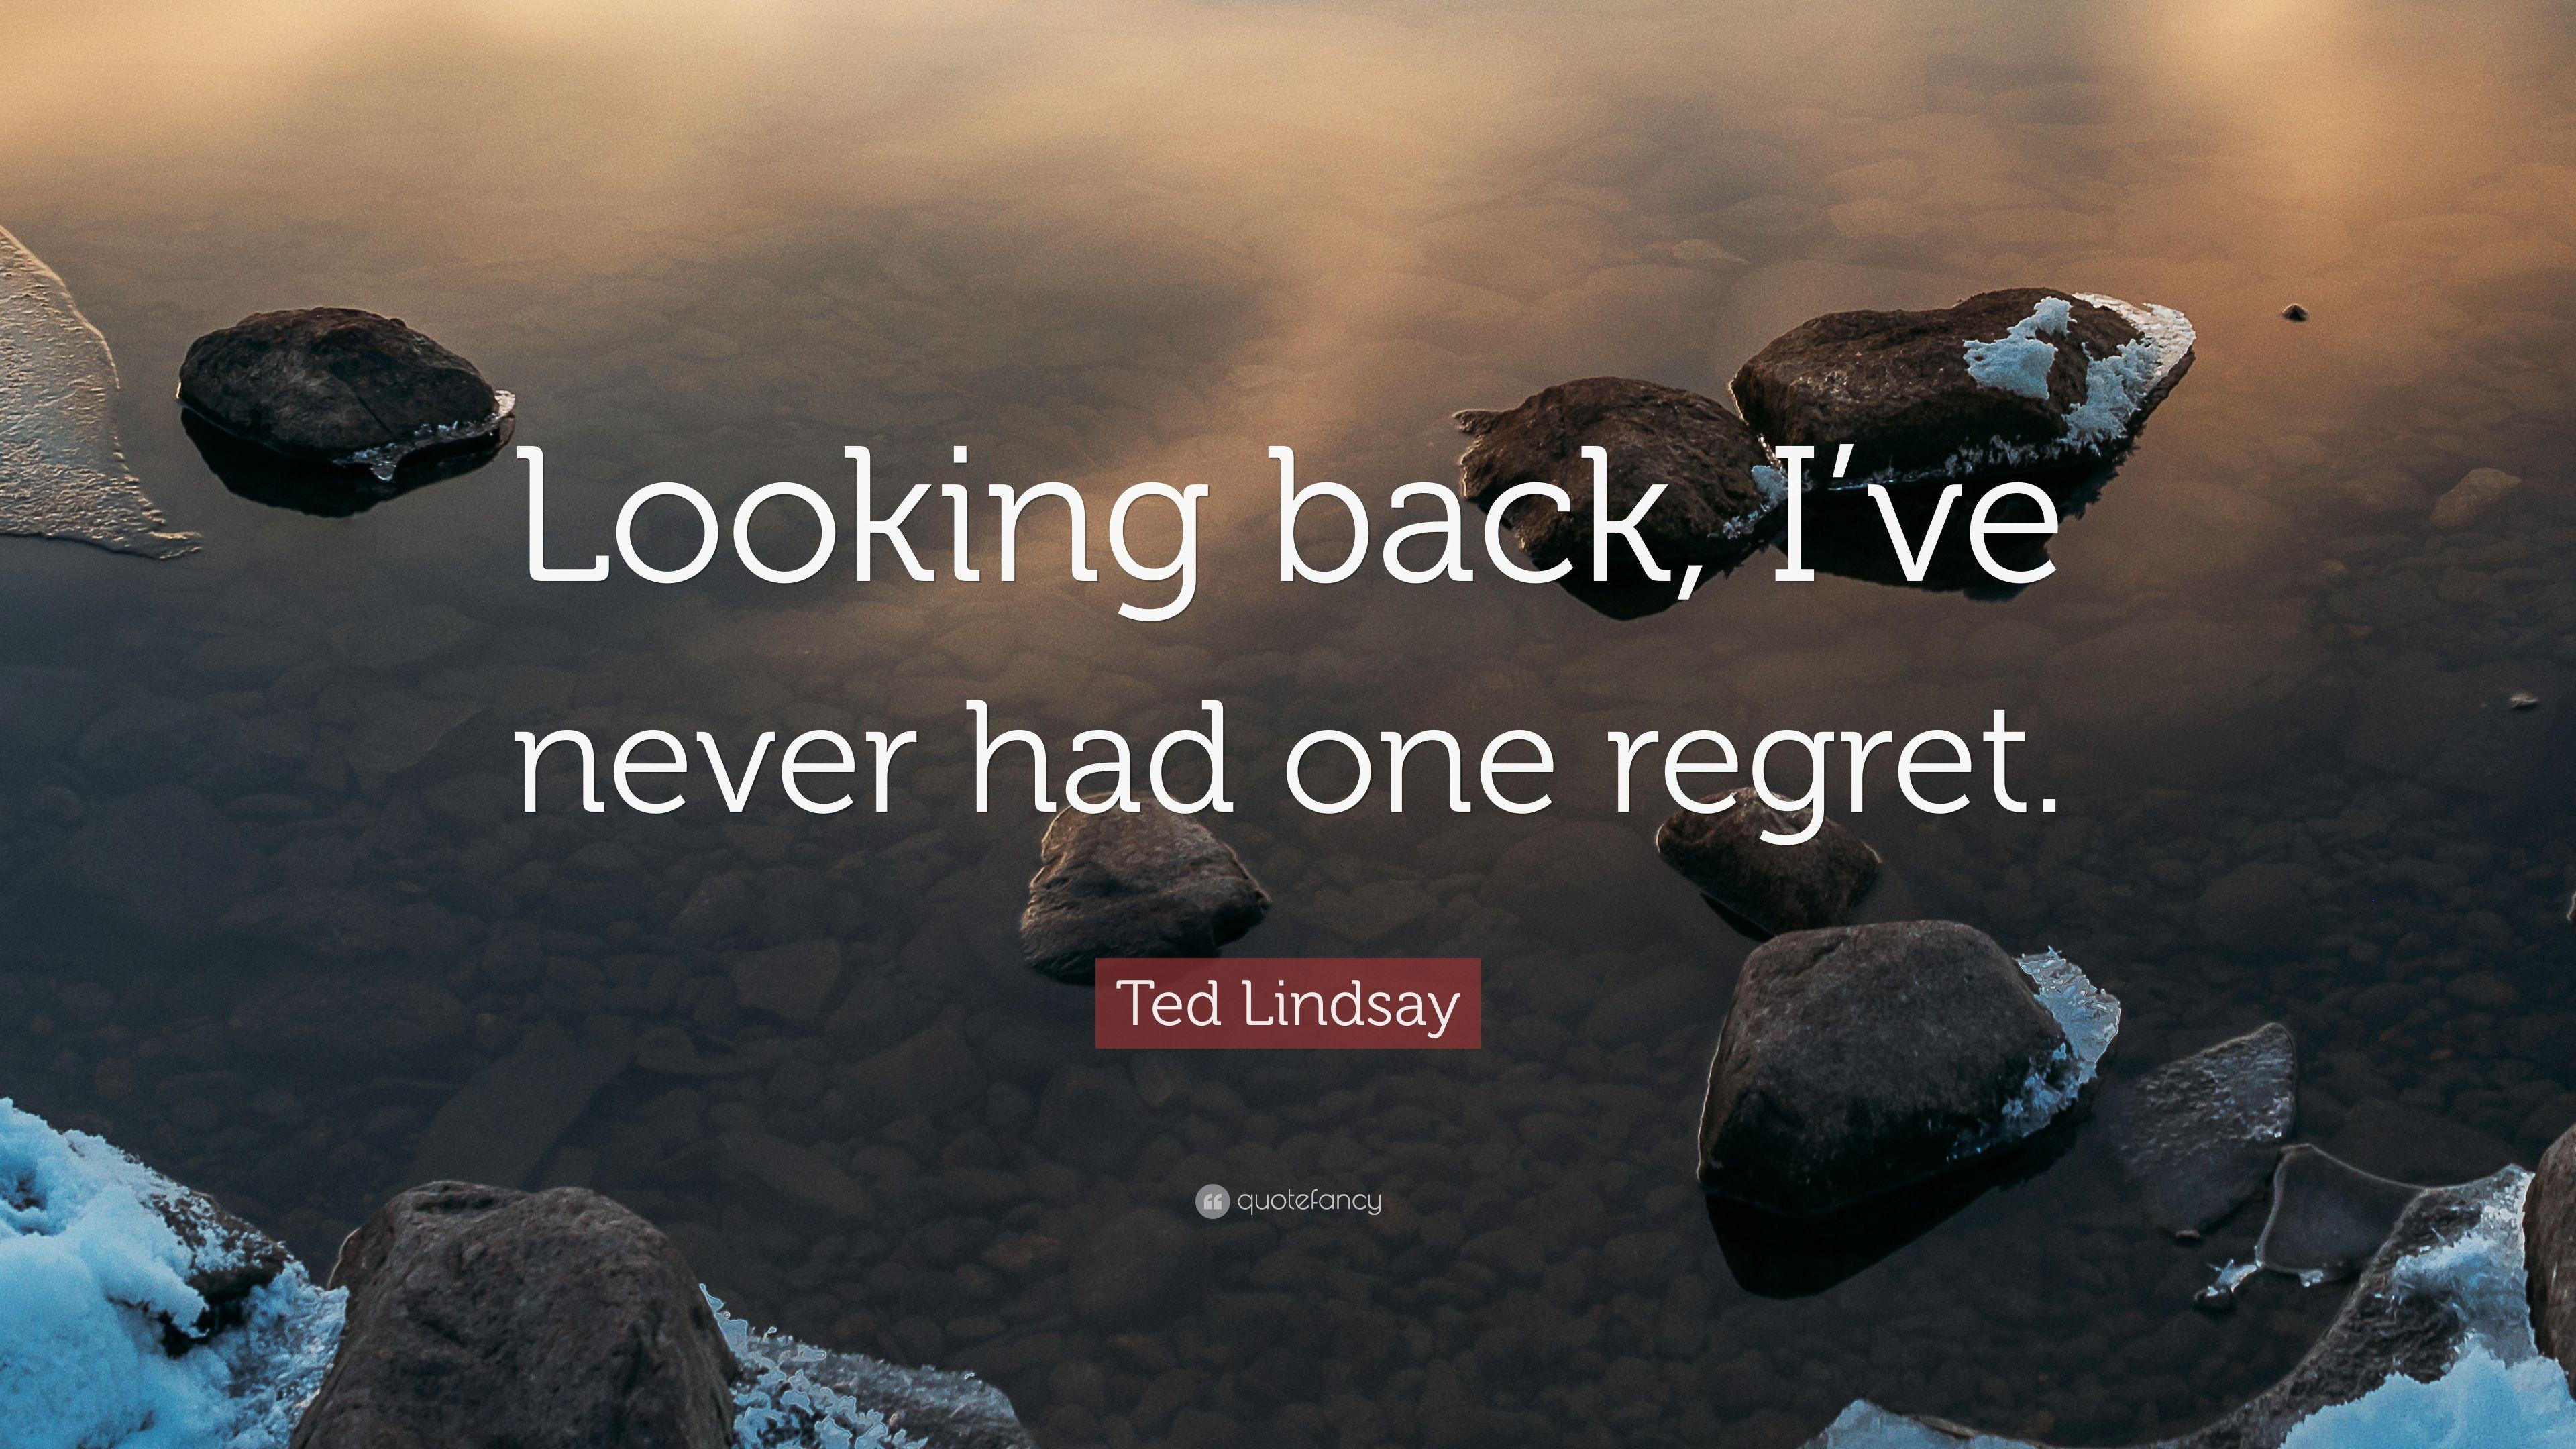 Ted Lindsay Quote: "Looking back, I've never had one regret. 